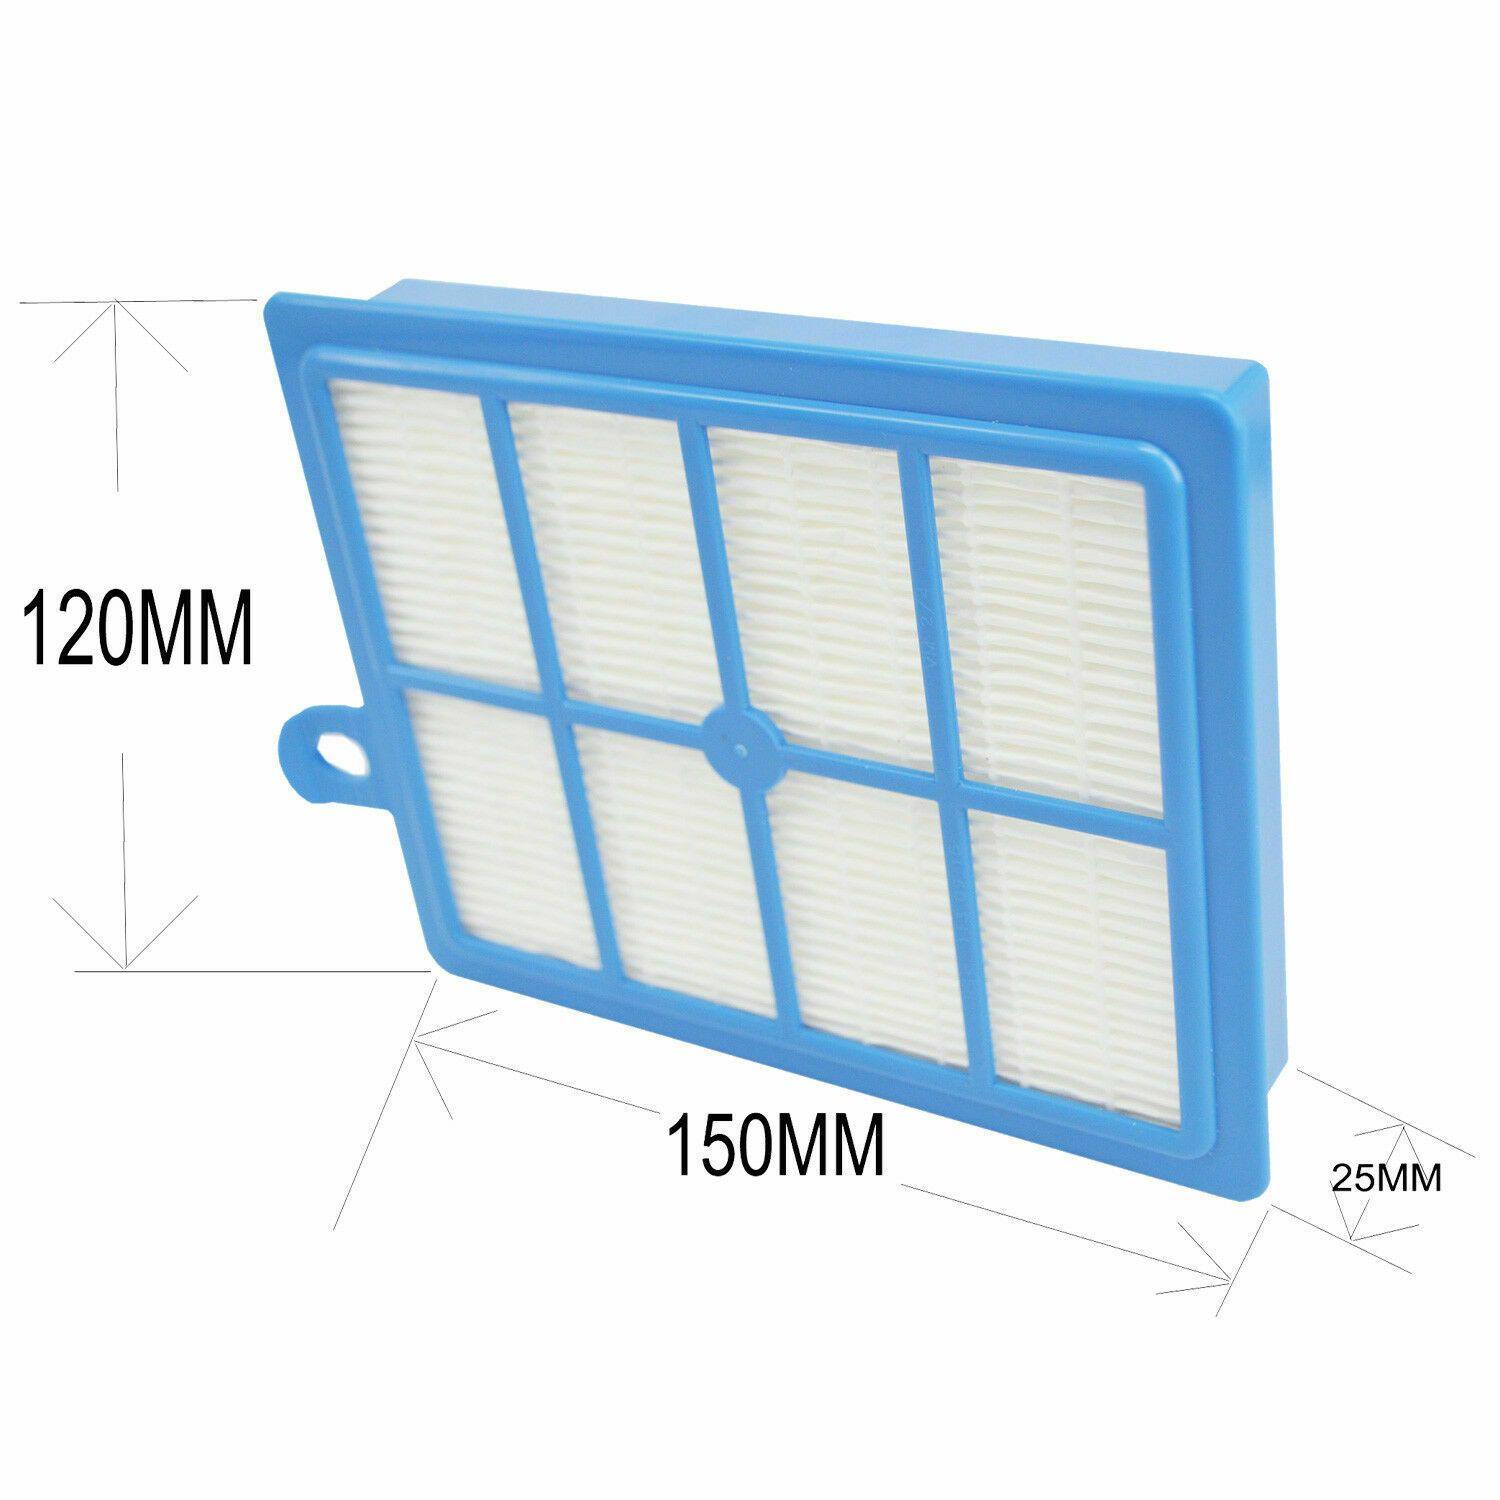 USK6 Vacuum Cleaner Filter Set For Electolux SuperCyclone ZSC6910 ZSC6920 Sparesbarn